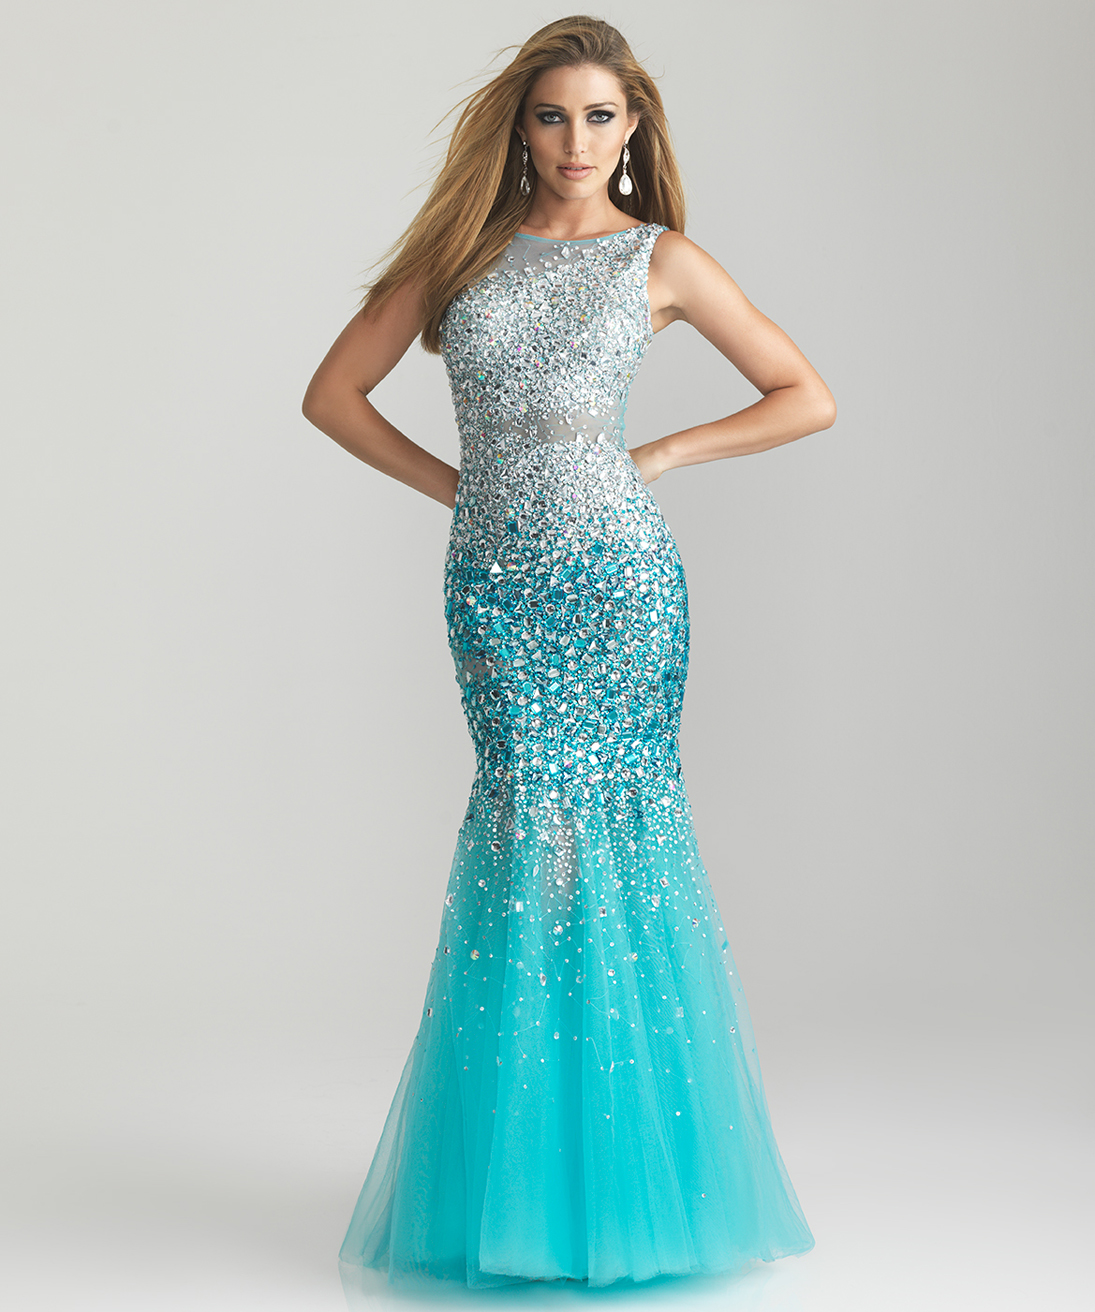 Stunning Prom Dresses And Wedding Dresses For You Quick Tips For